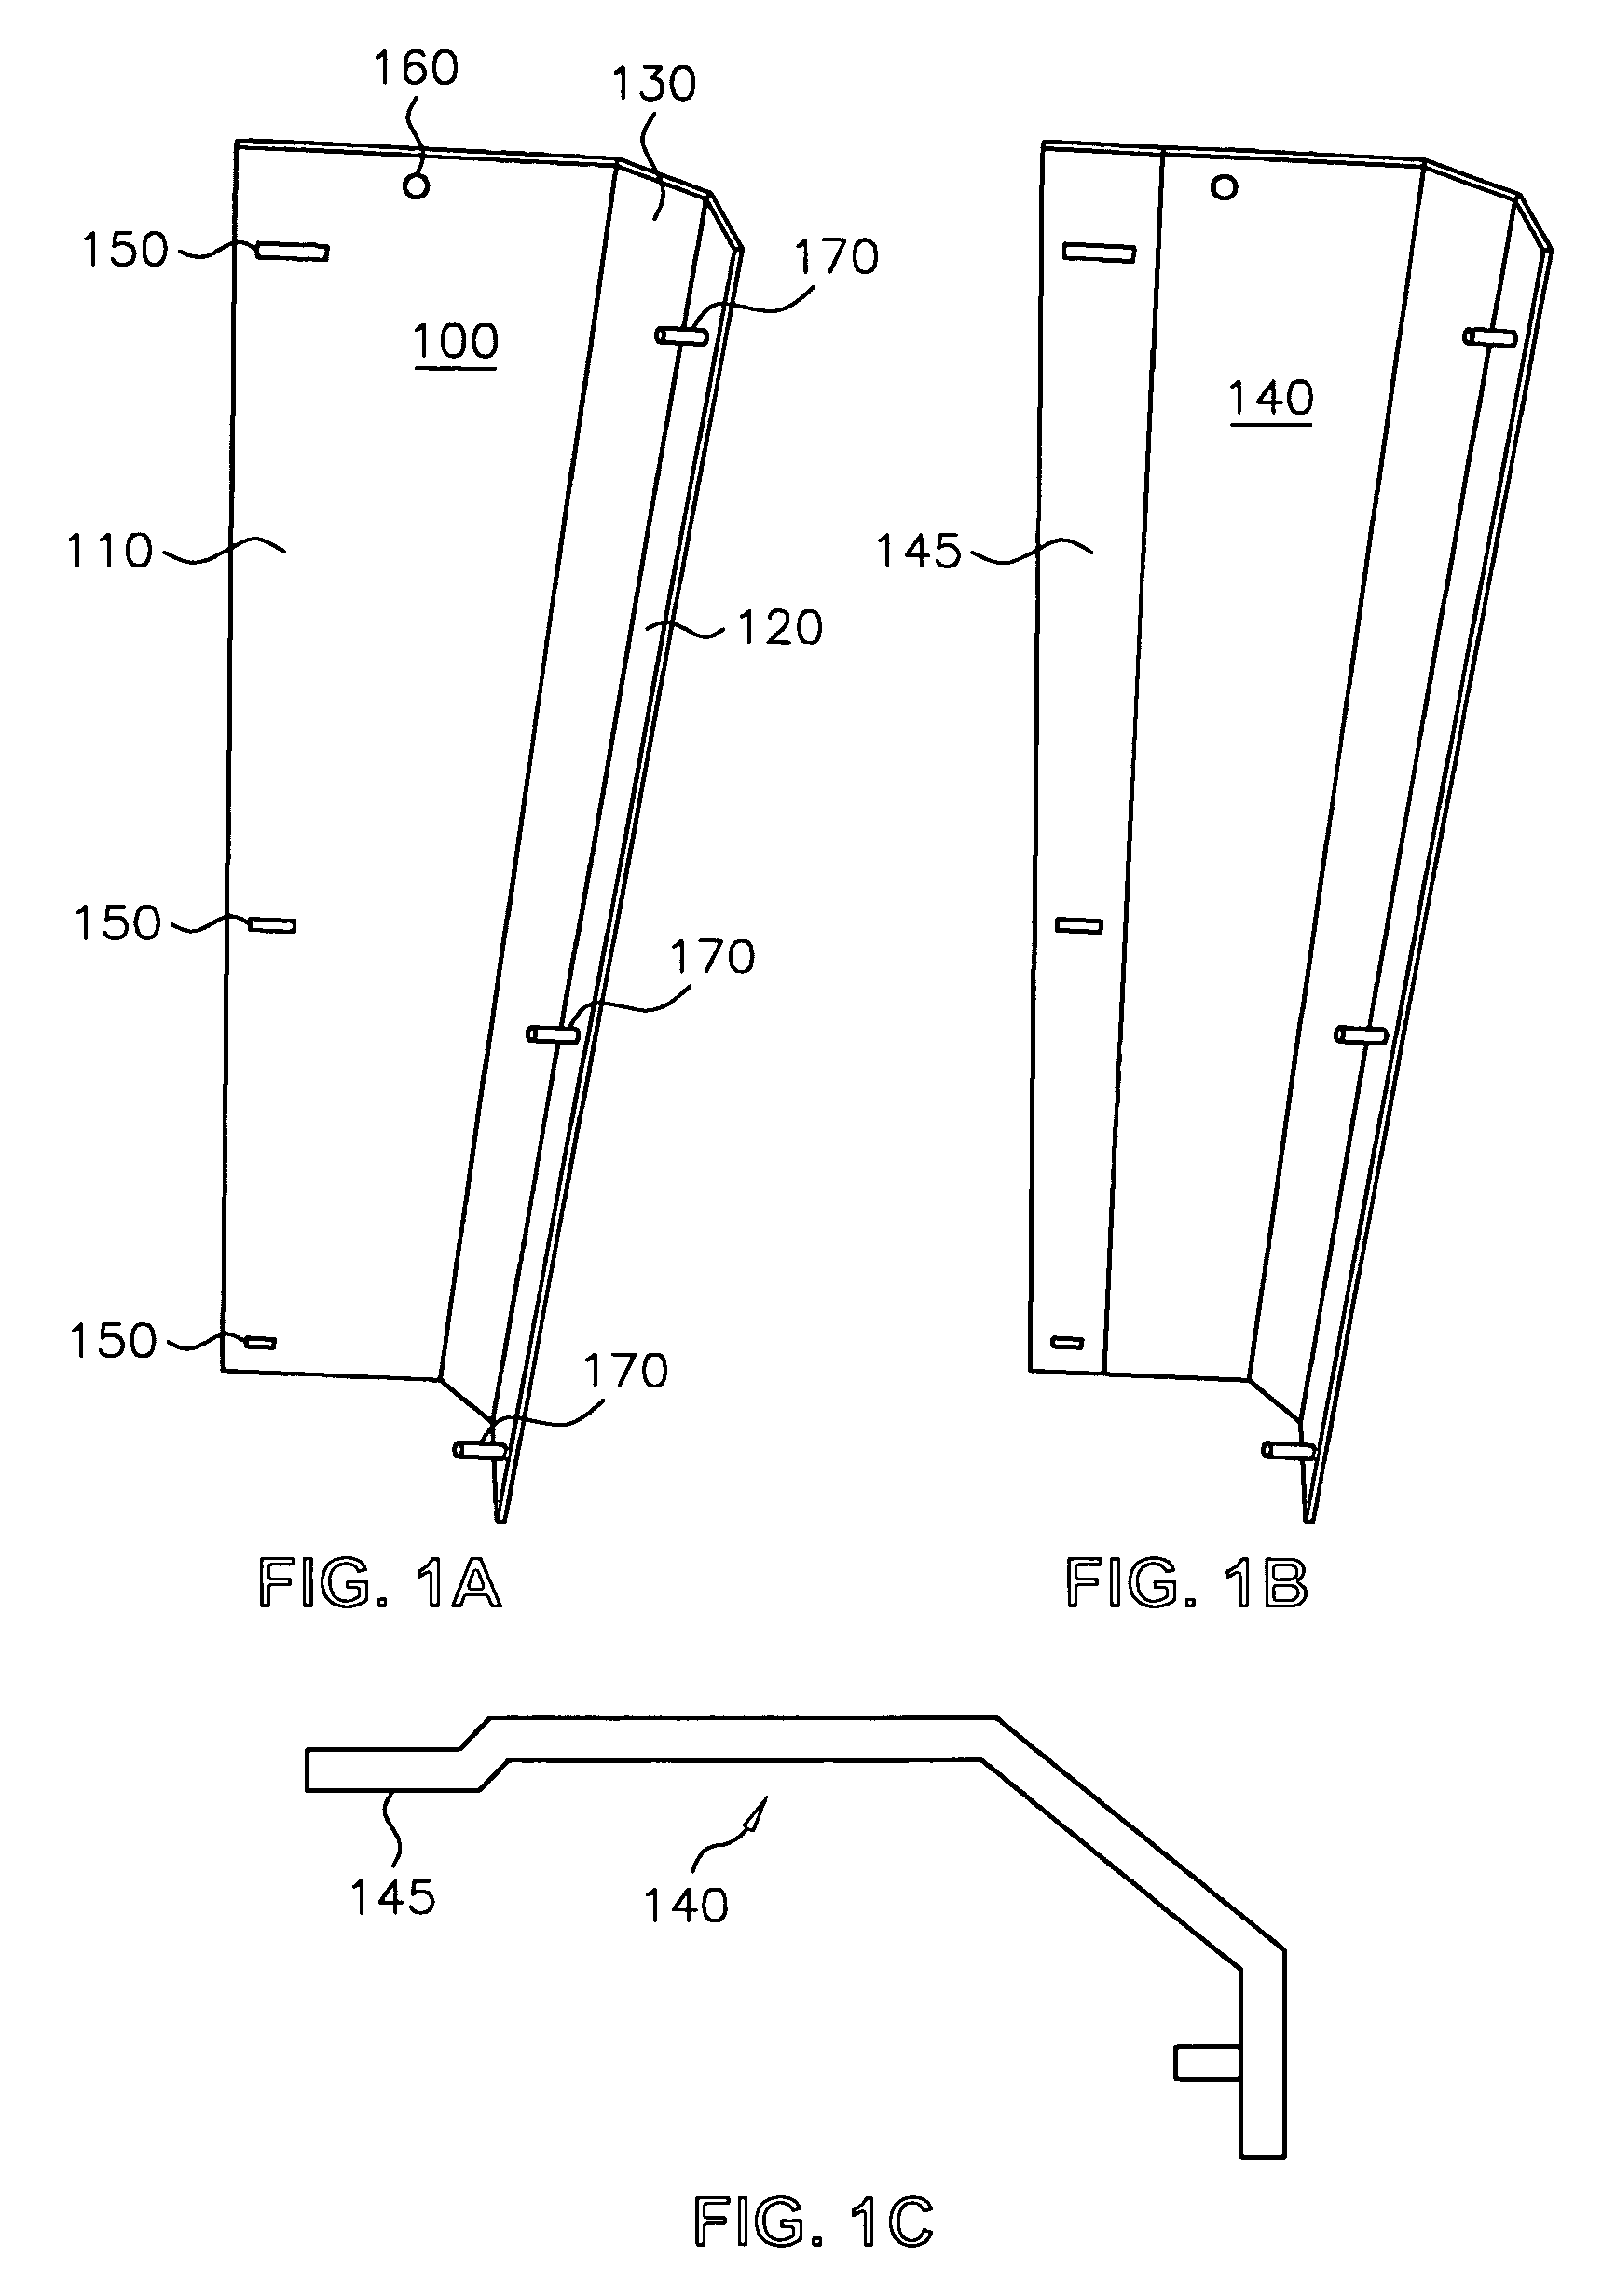 Method and apparatus for extending a chimney